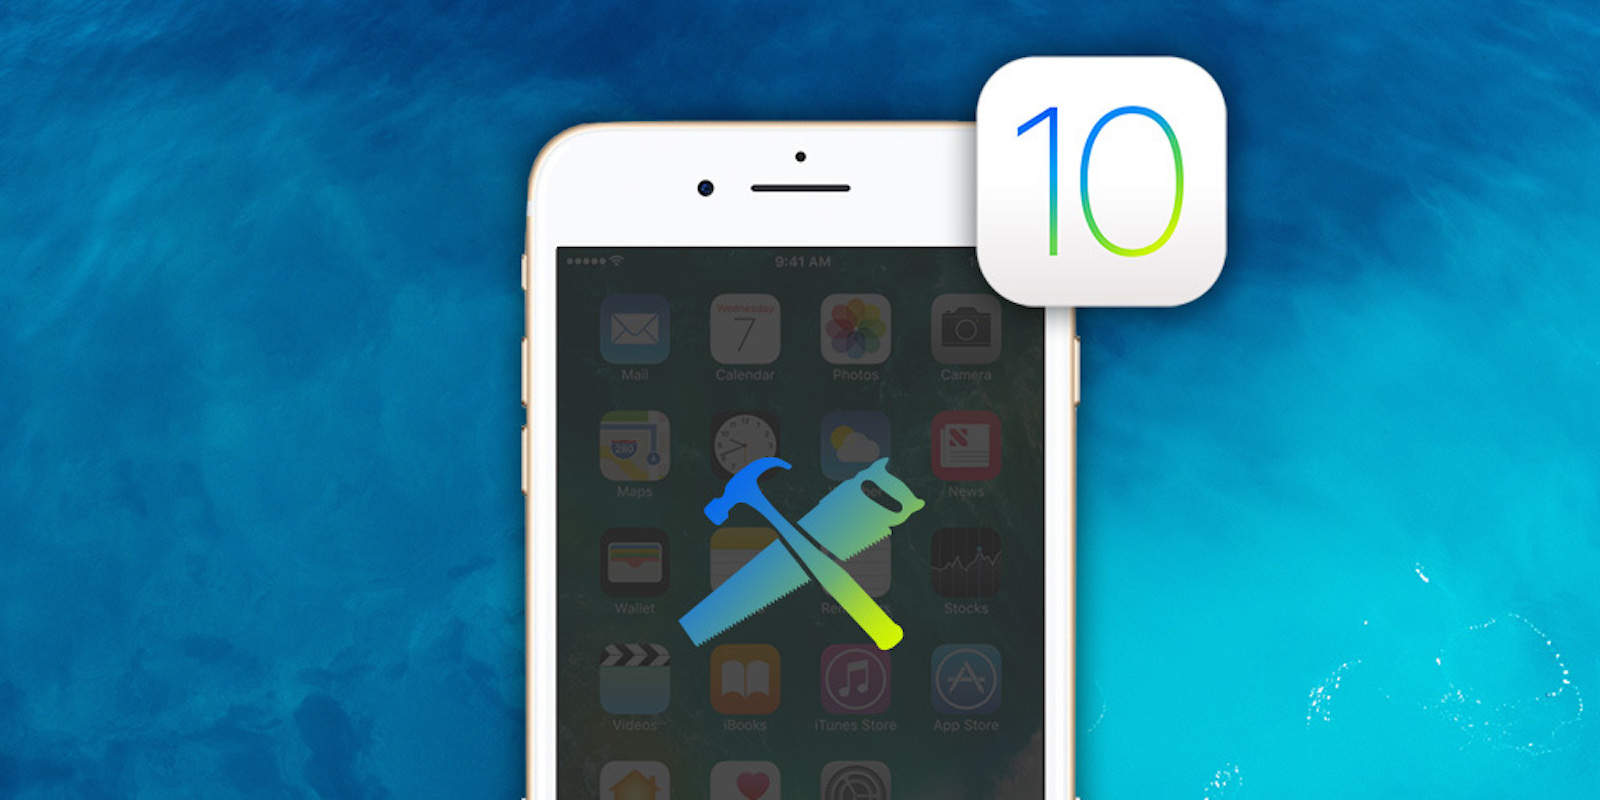 This bundle of lessons will give you the skills you need to start developing for iOS 10.